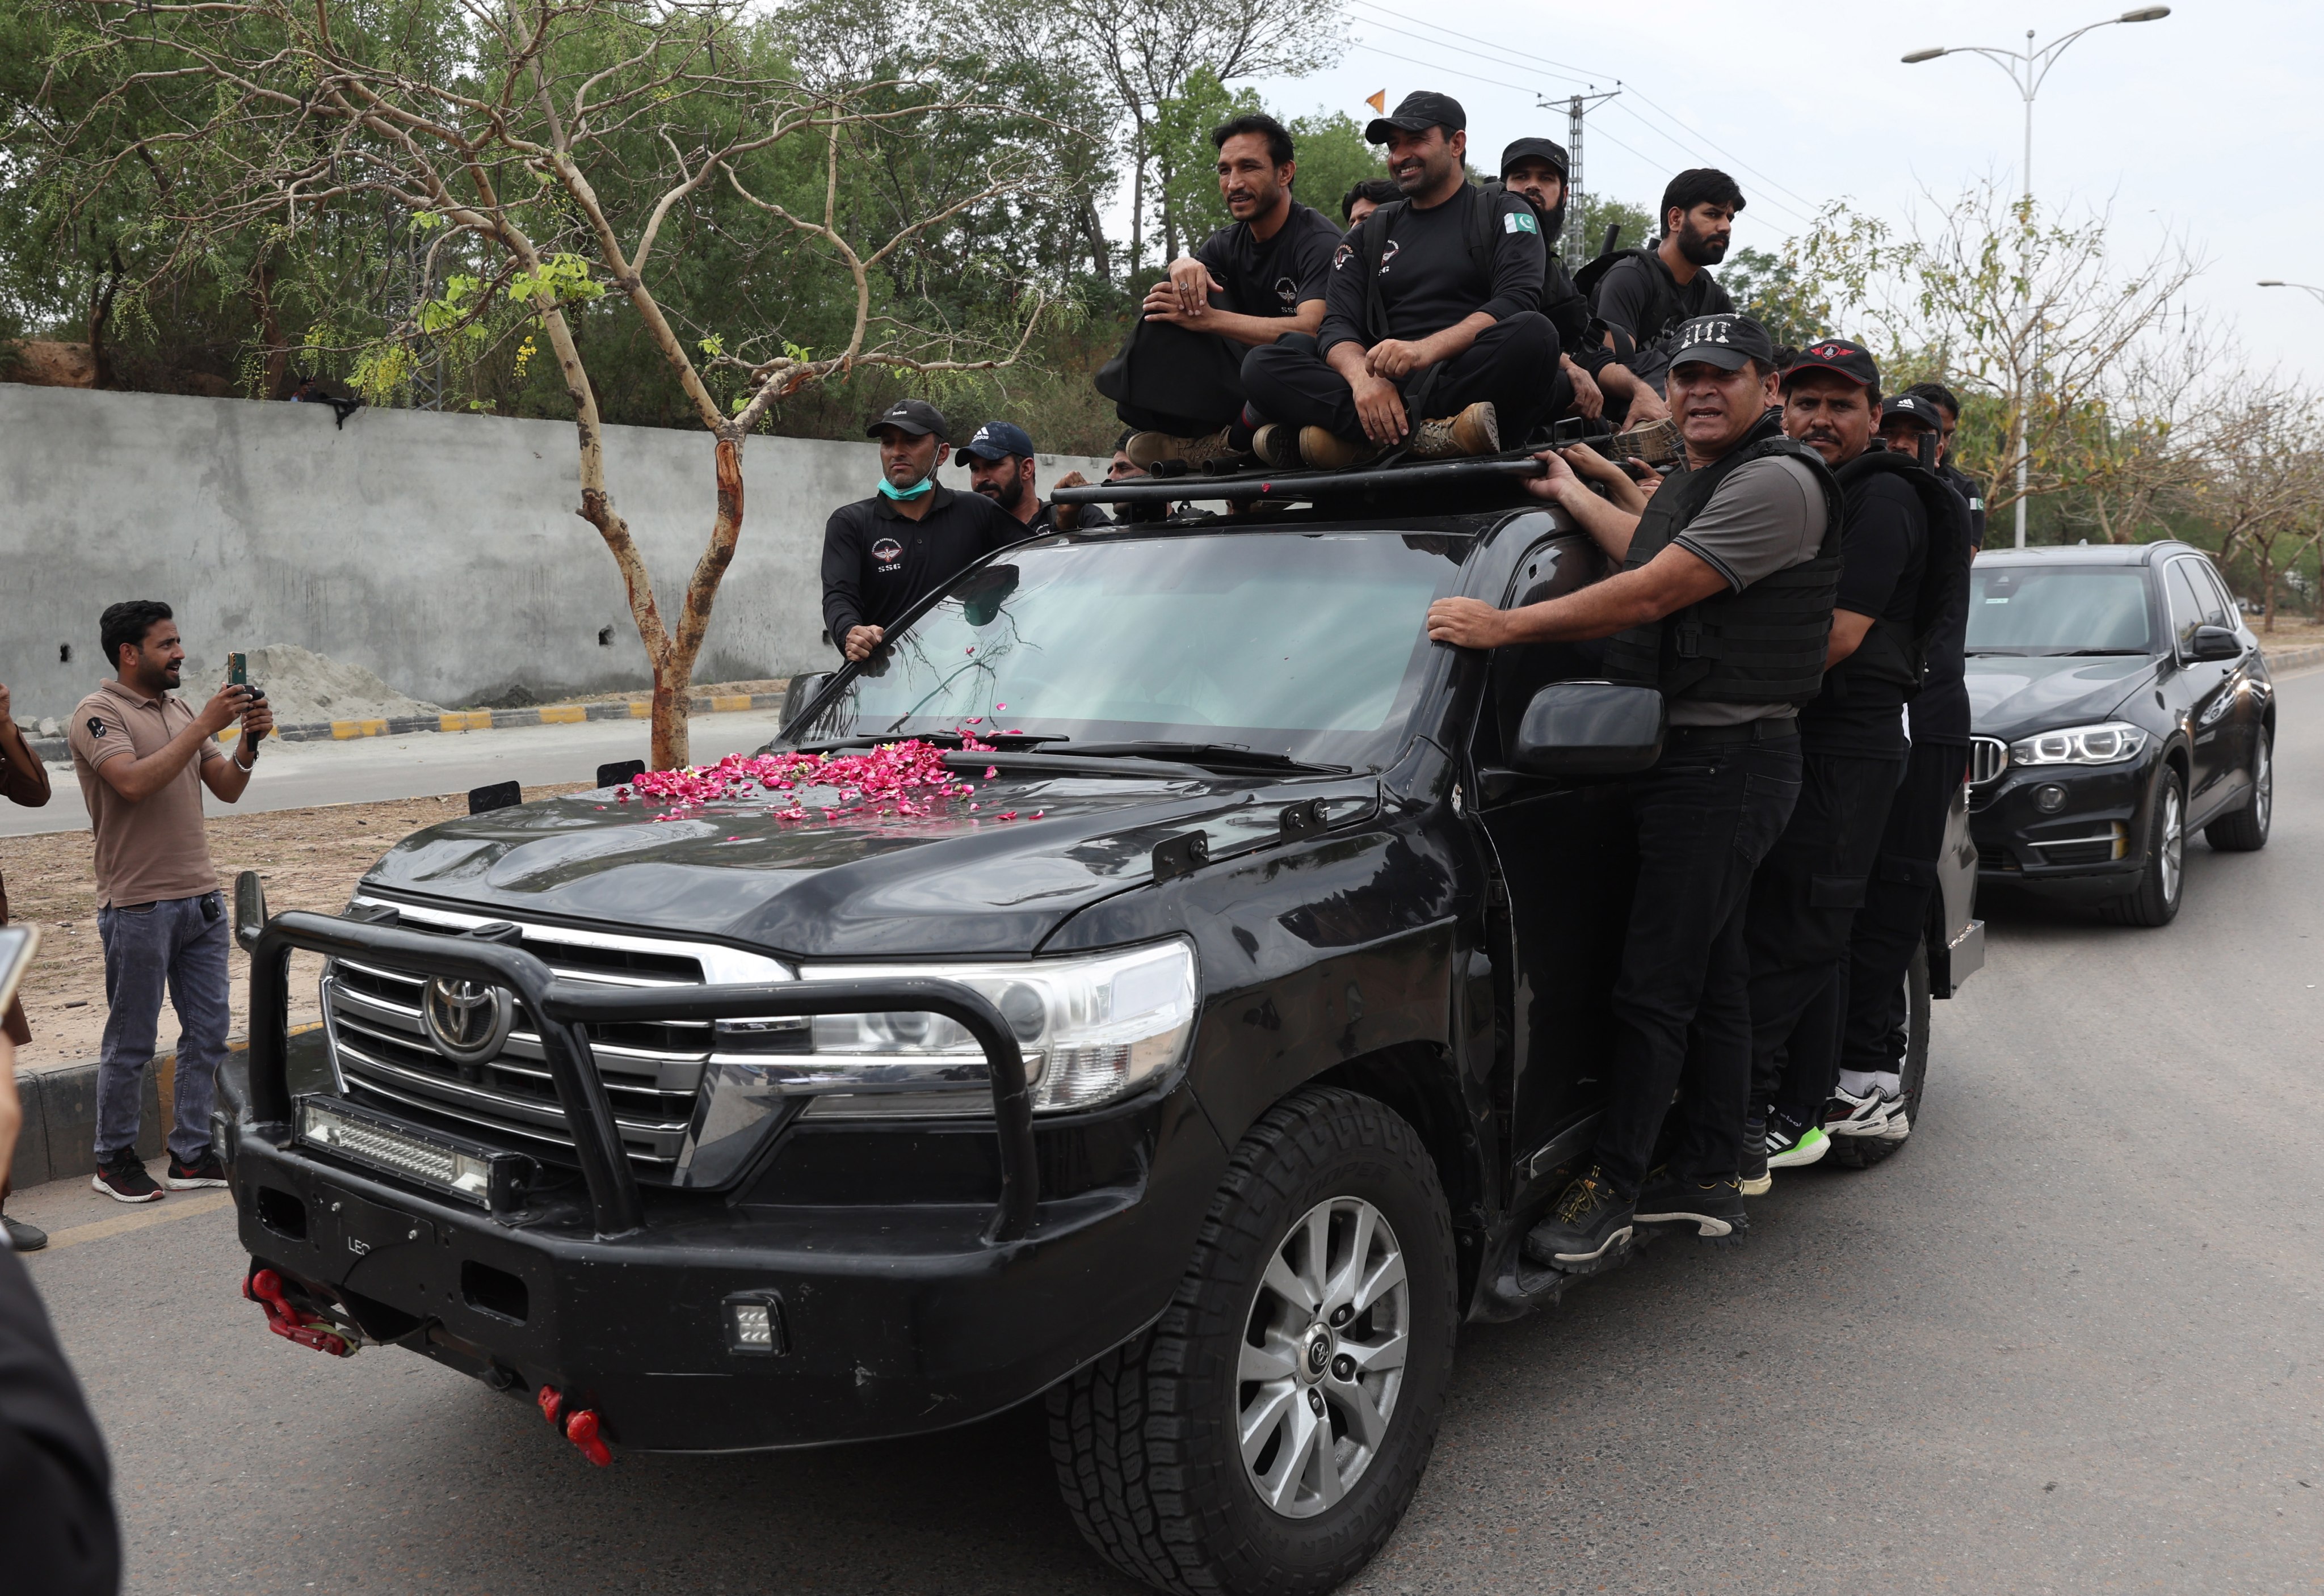 Private security personnel escort a vehicle transporting former Prime Minister Imran Khan to court to get bail on Tuesday in cases related to the violence that erupted in March between his supporters and police. Photo: EPA-EFE